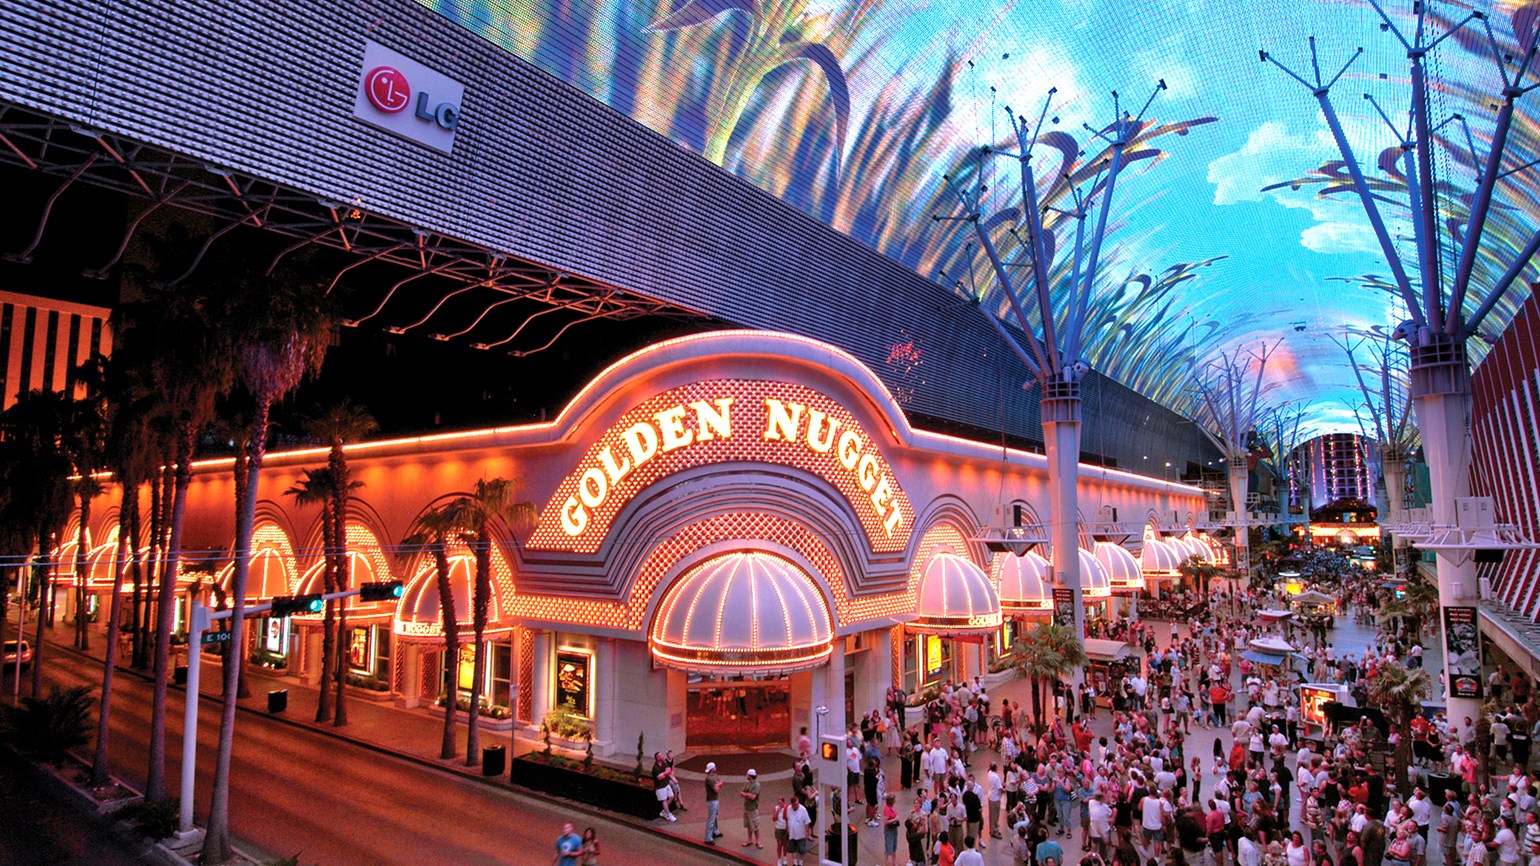 The Fremont Street Experience at night.